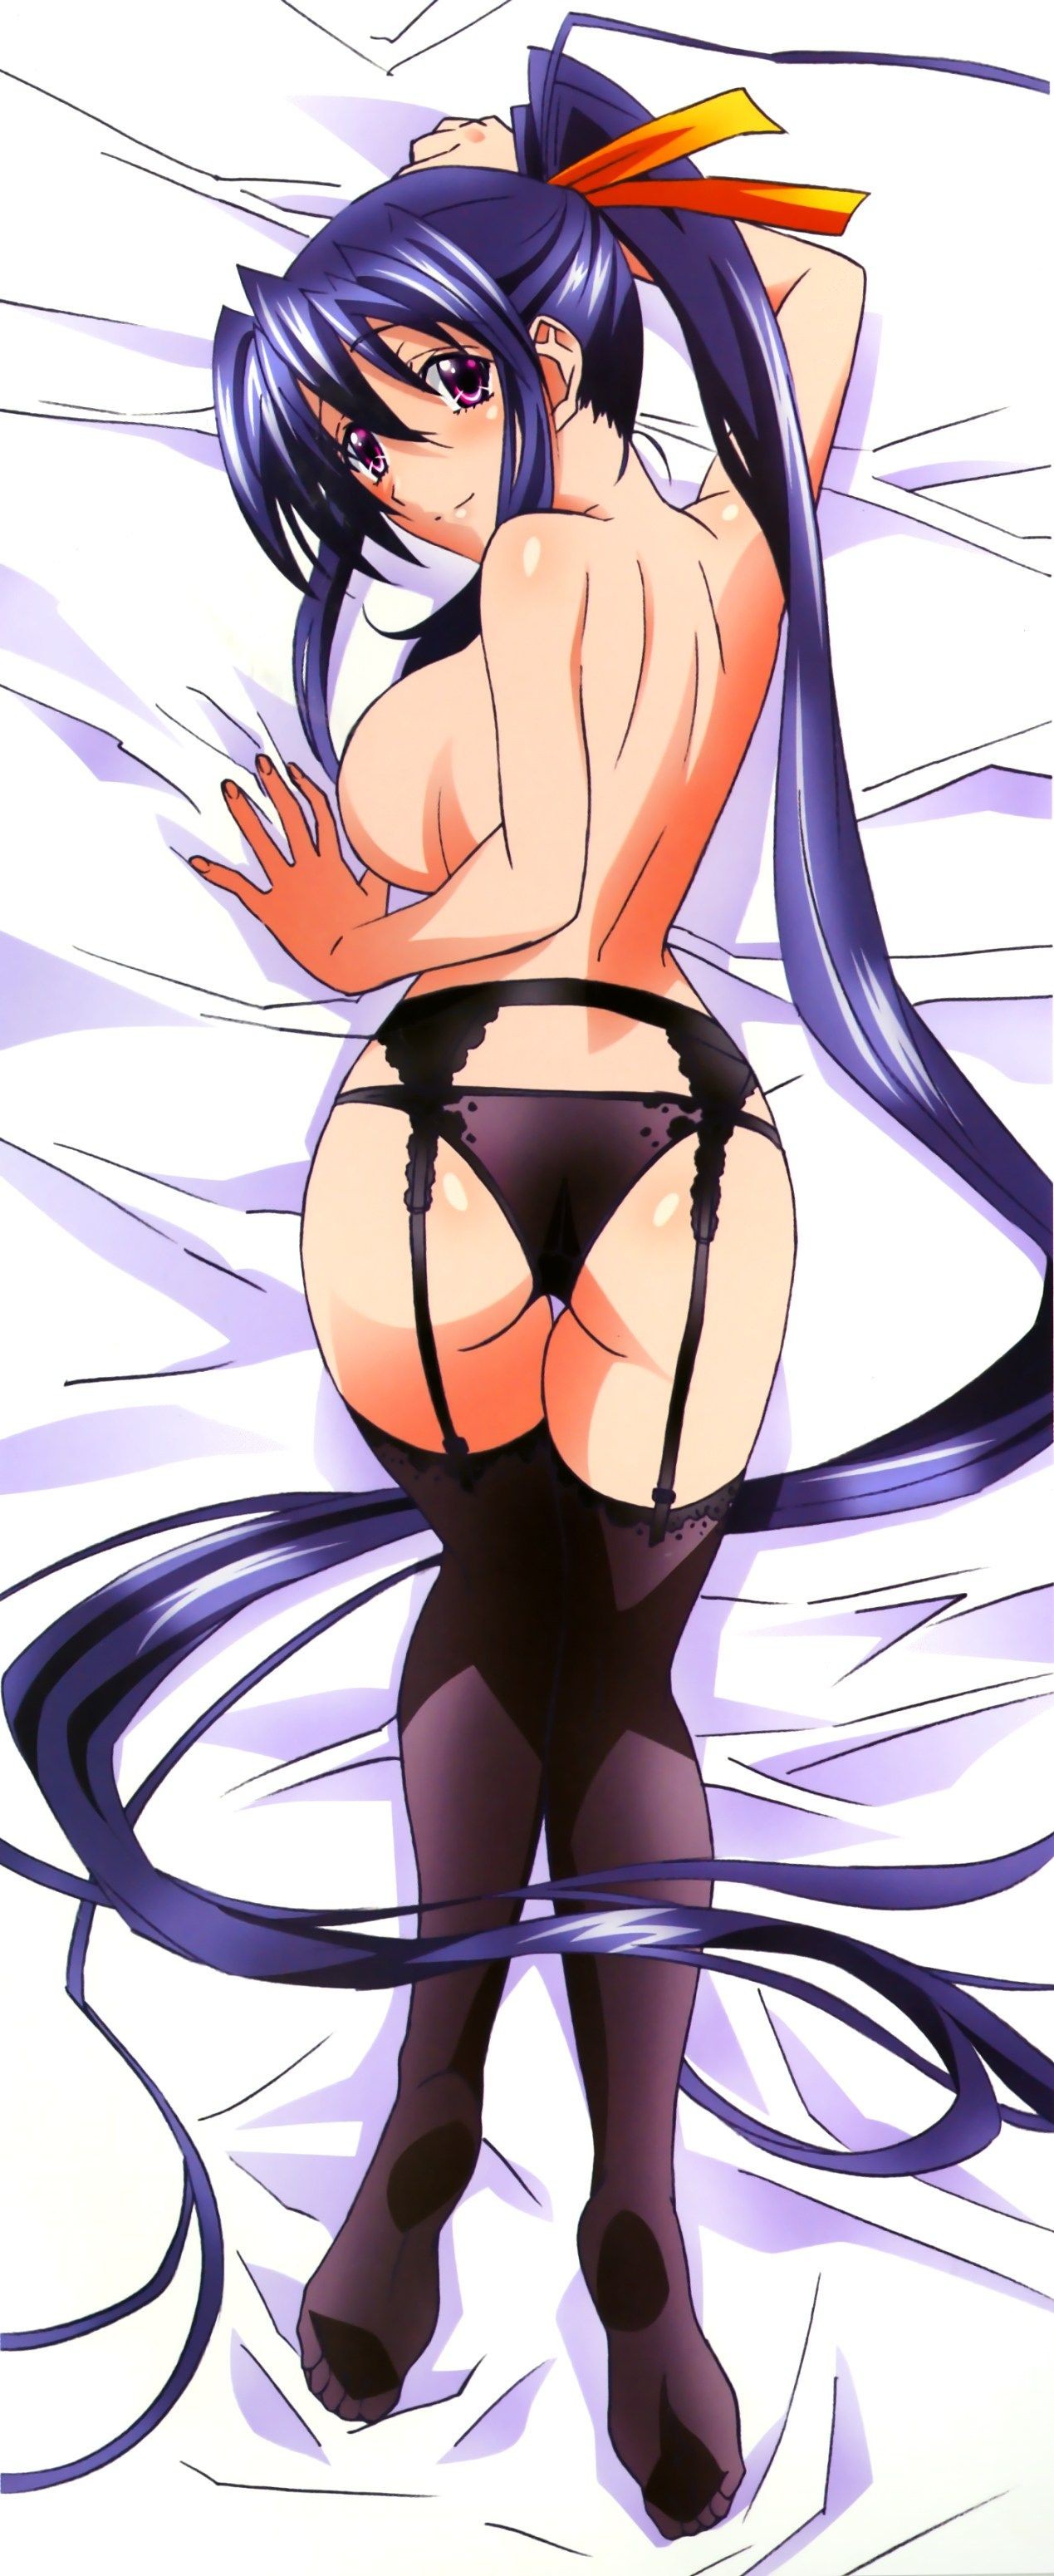 Hair [Dakimakura] Image Of Erotic Two-dimensional Pillow Cover Anime Game System Part 26 Gagging